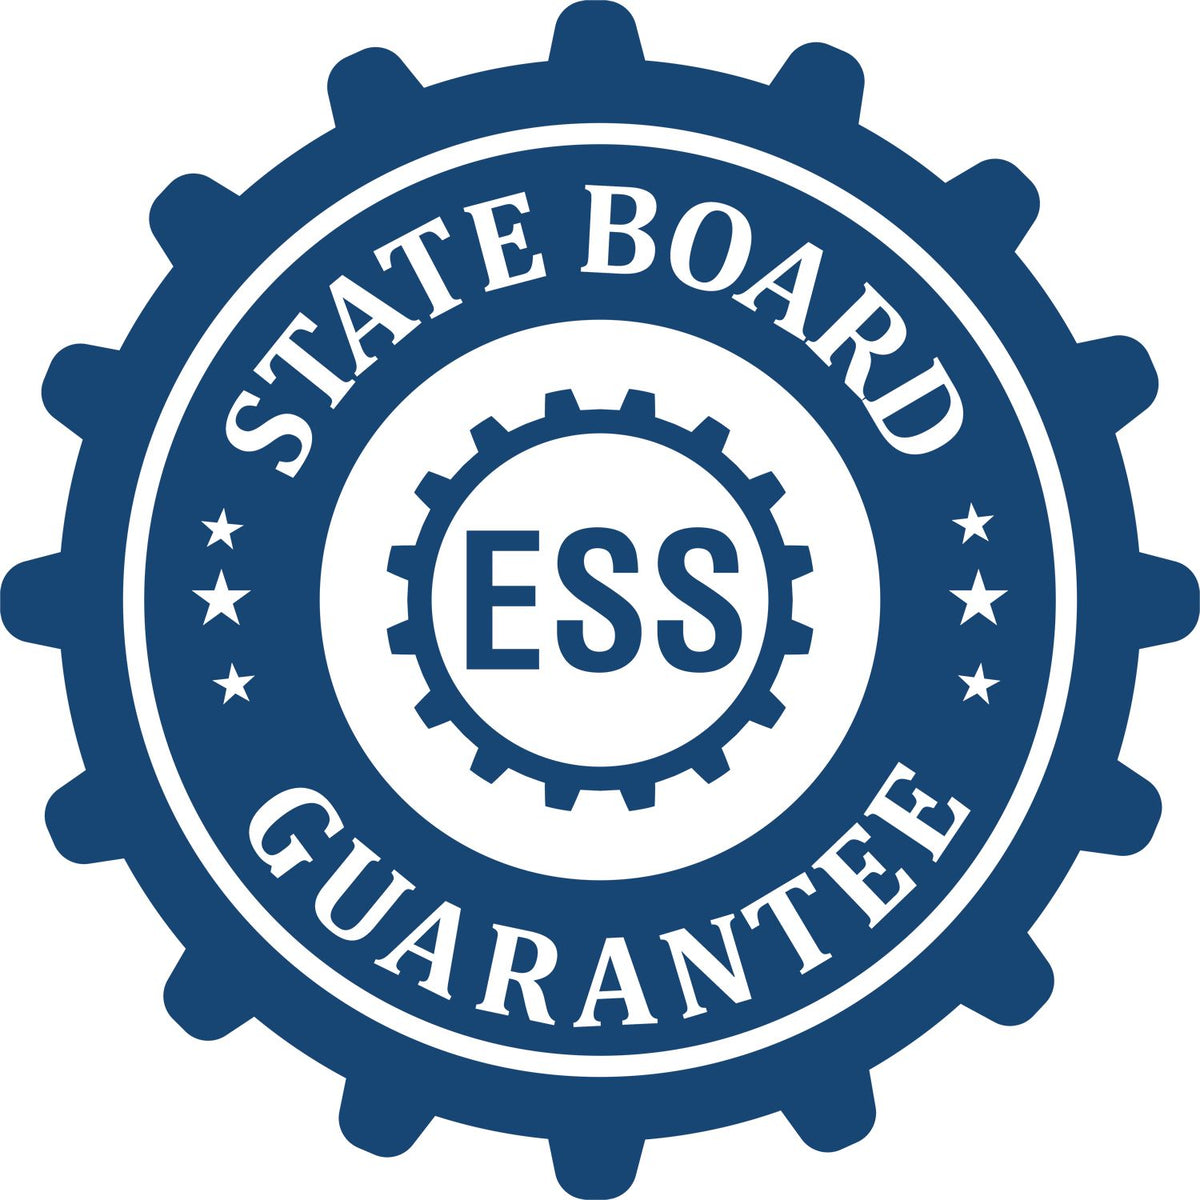 An emblem in a gear shape illustrating a state board guarantee for the Extended Long Reach Iowa Surveyor Embosser product.